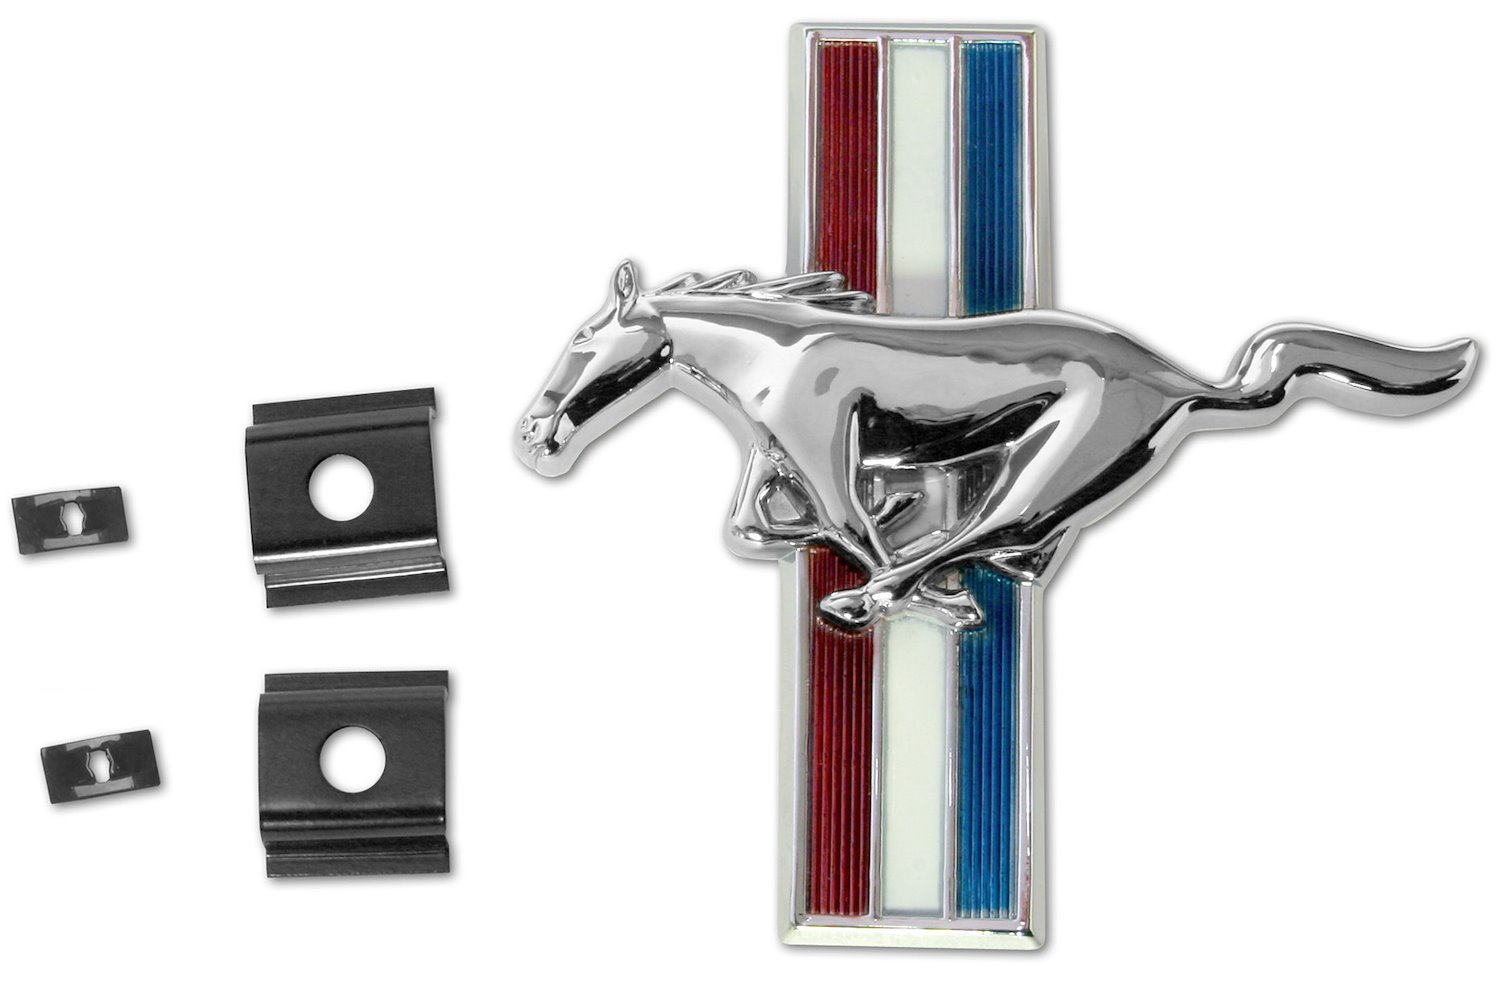 Officially-Licensed Ford Grille Emblem for 1966 Ford Shelby GT350 Mustang Concours [Tri-Bar Running Pony Logo] Chrome